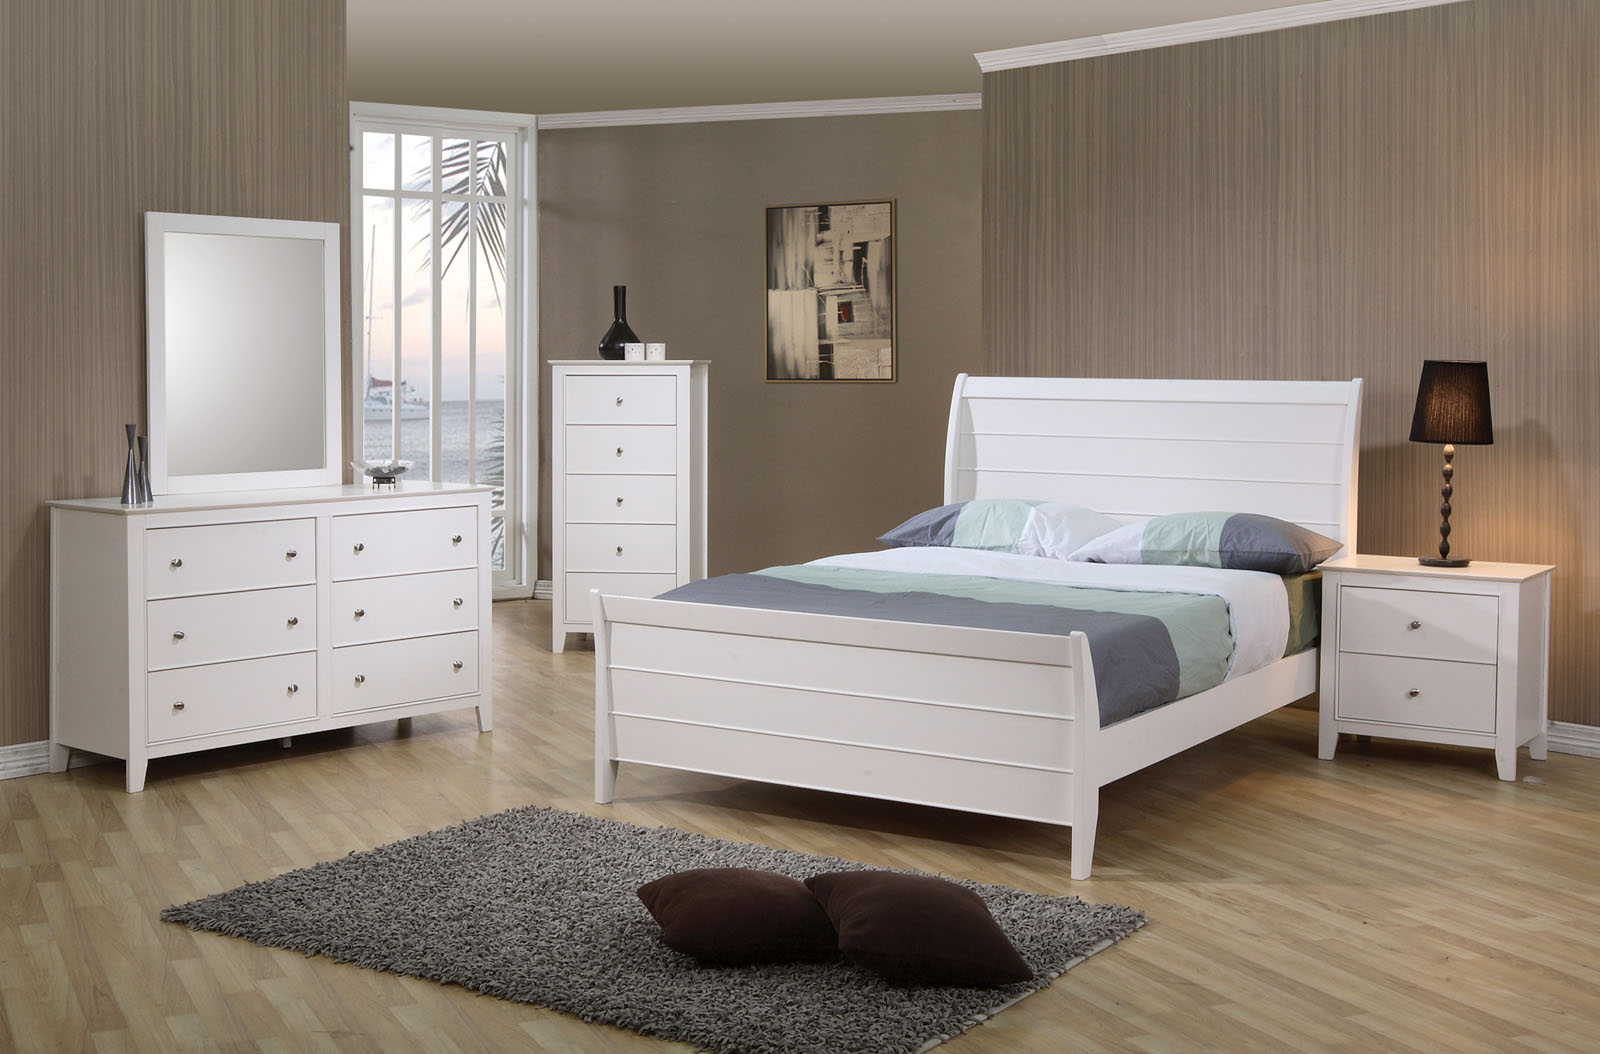 Coaster Selena Youth 4pc Sleigh Bedroom Set In White 400231 pertaining to dimensions 1600 X 1054